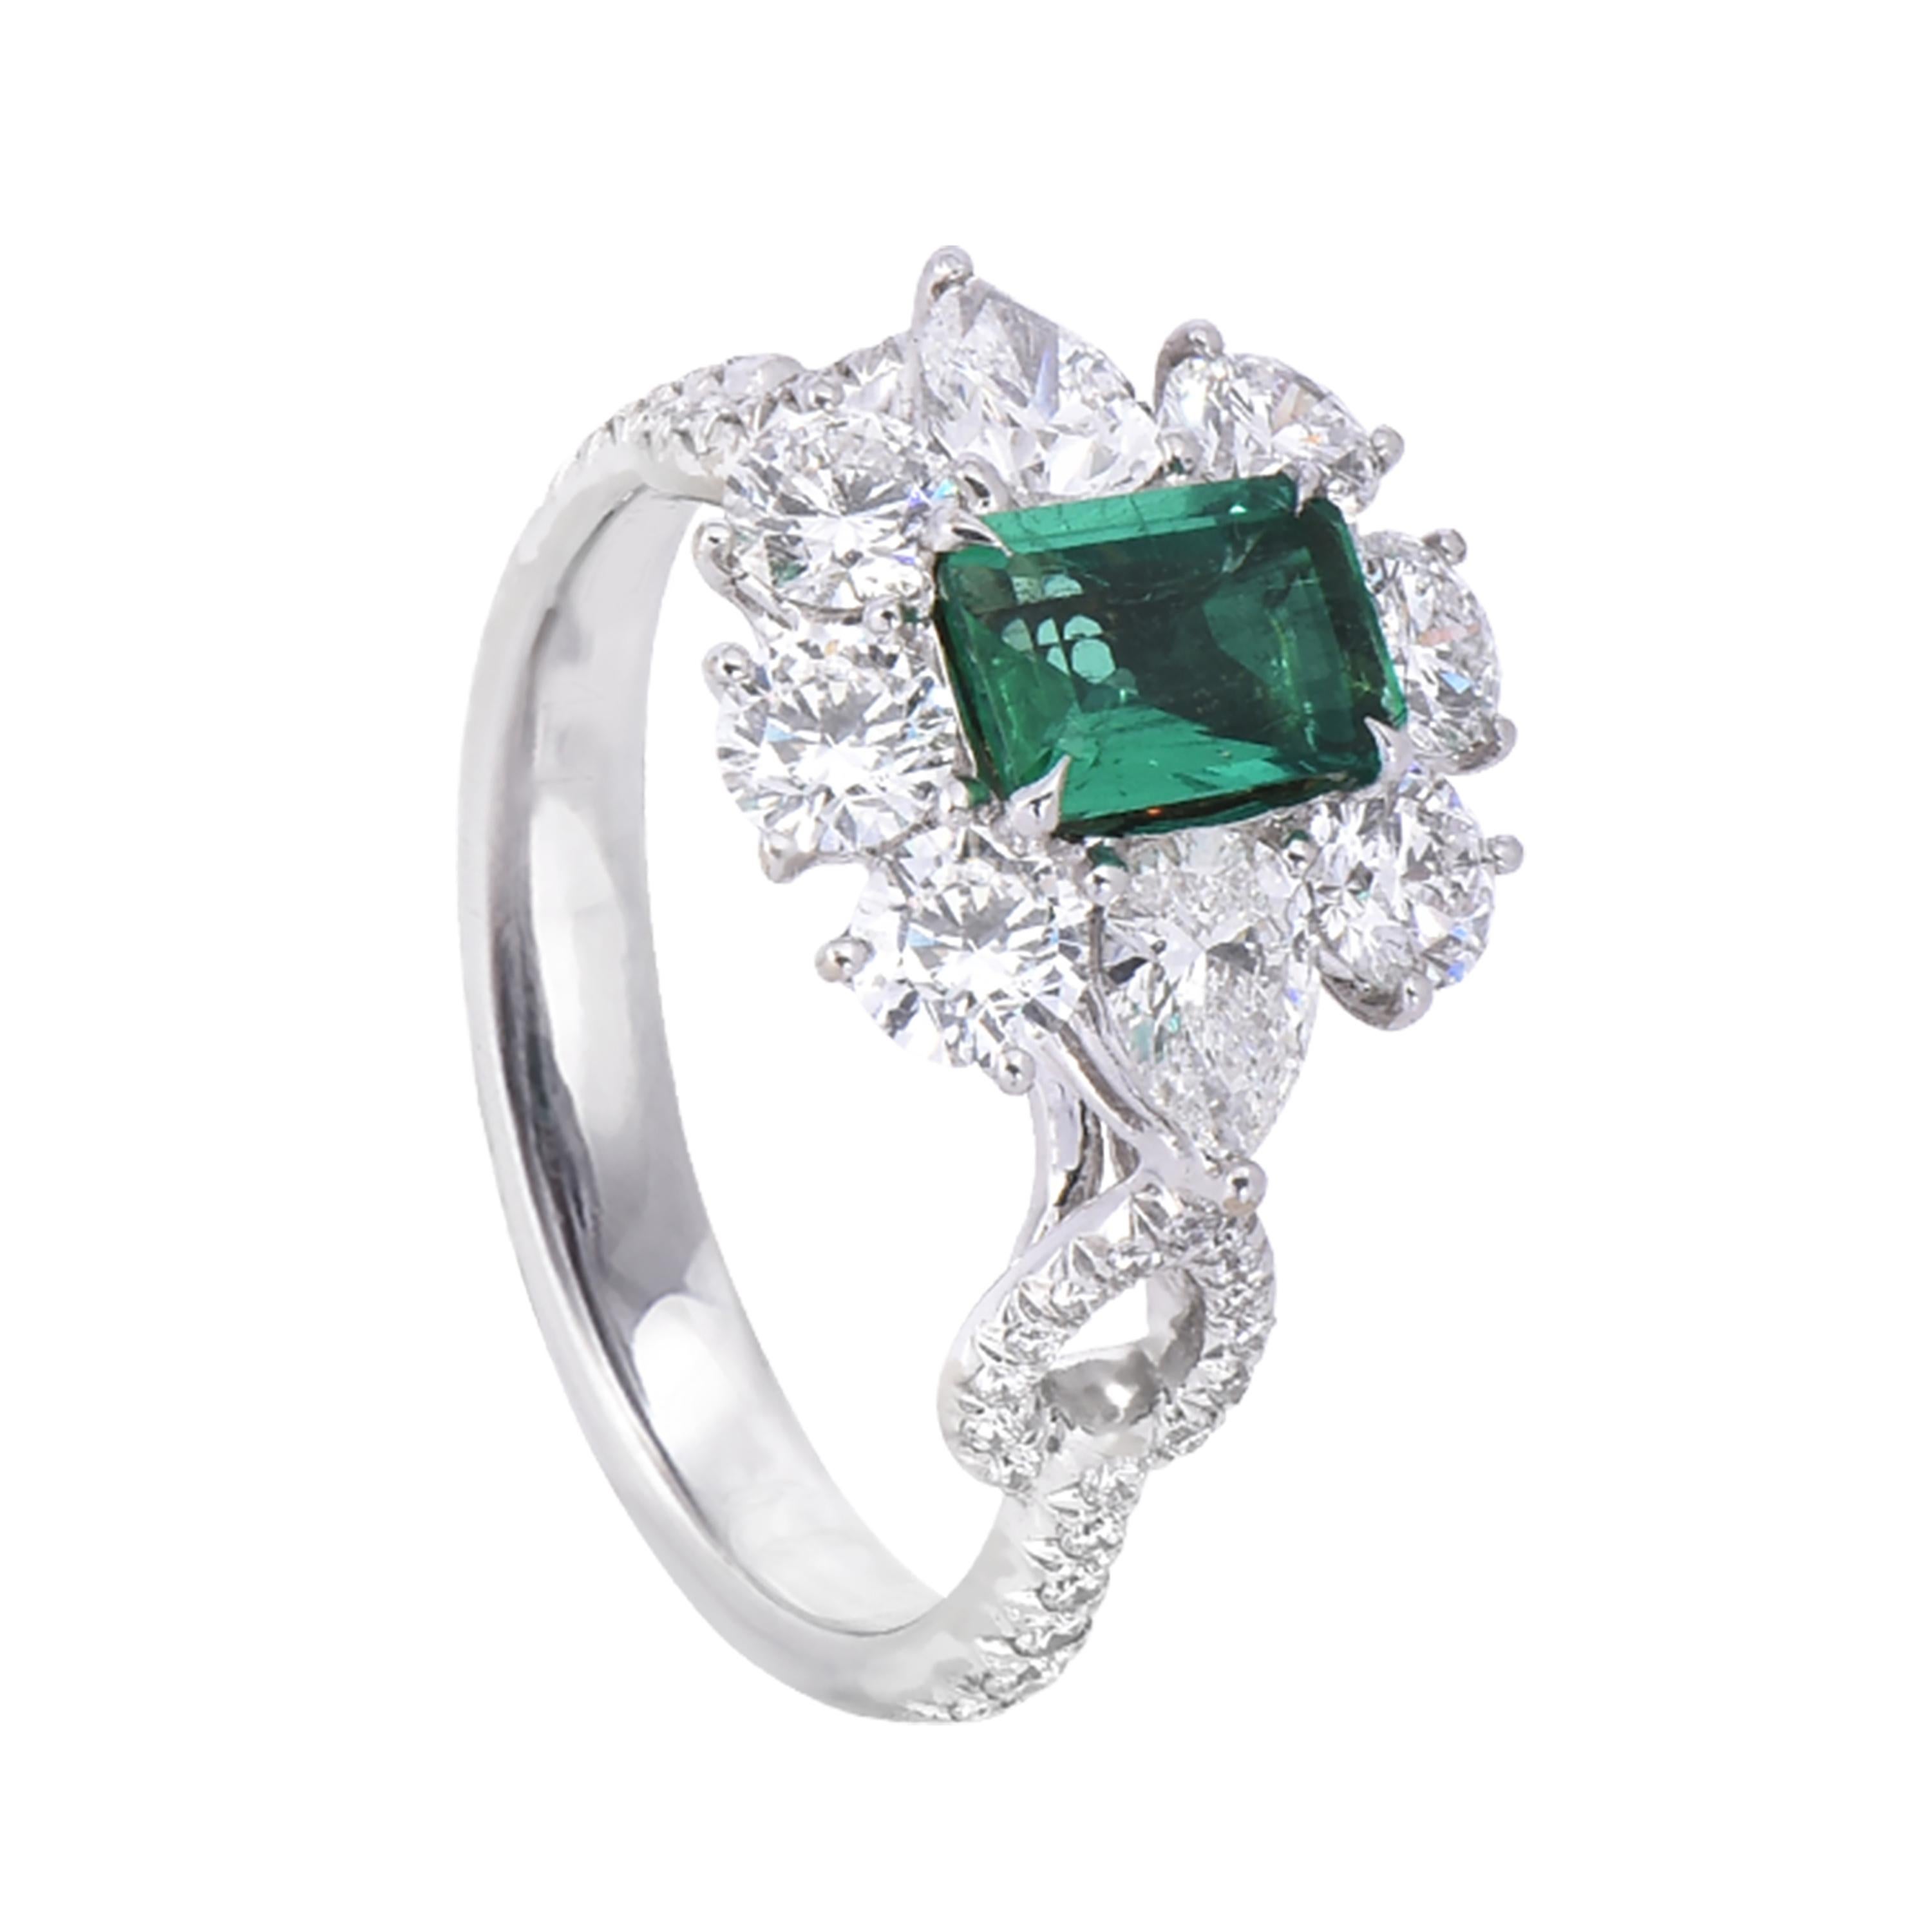 A classic 18 karat white gold emerald ring from the Viridian collection of Laviere. The ring, certified by IGI, is set with a 0.94 carats octagon-cut emerald and surrounded by 1.18 carats round and 0.48 carats pear shape brilliant diamonds.
Gold